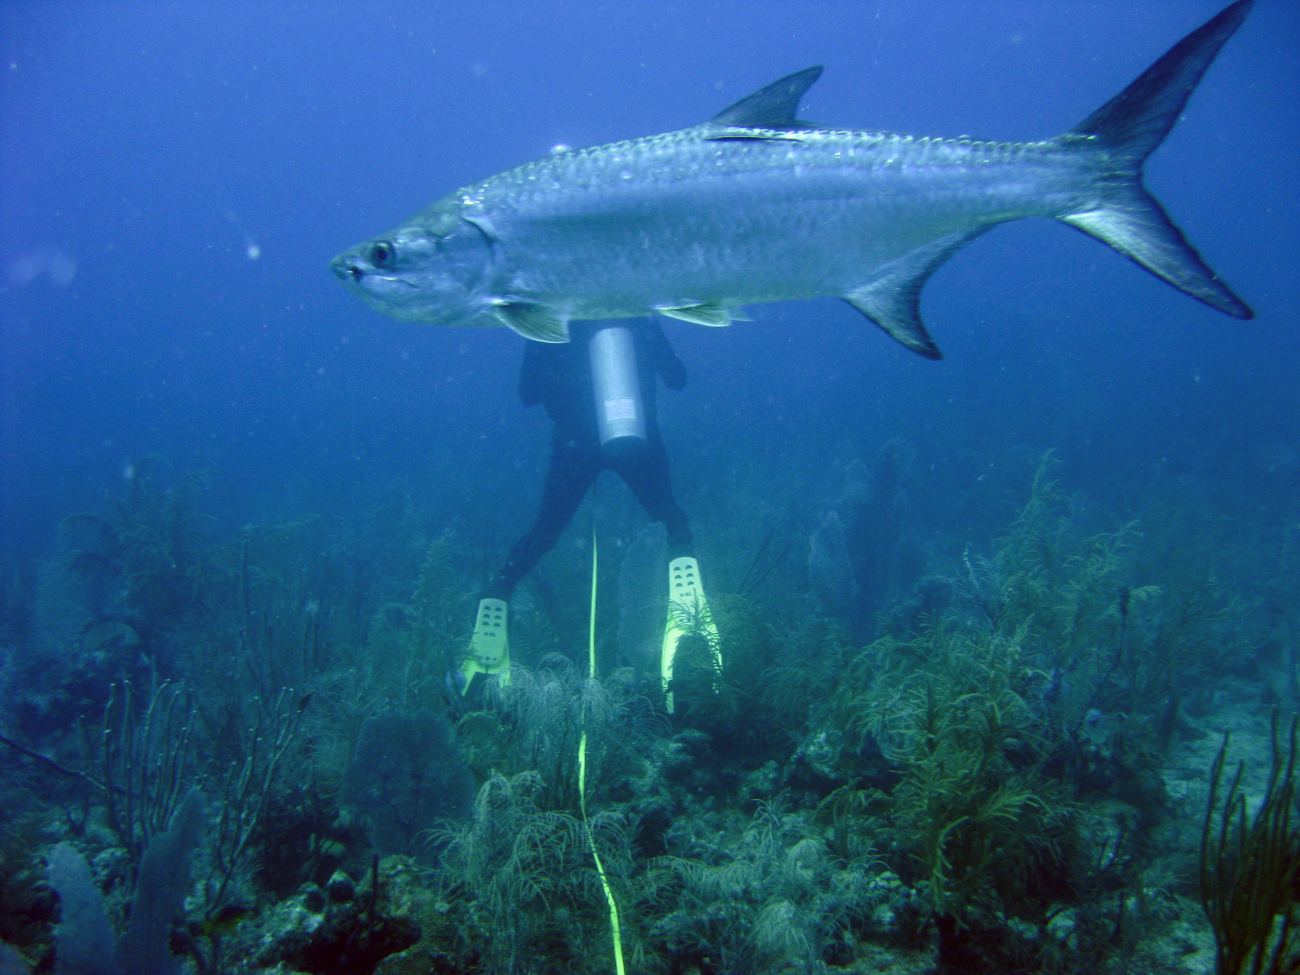 Tarpon (Megalops atlanticus) with scientist diver in the background